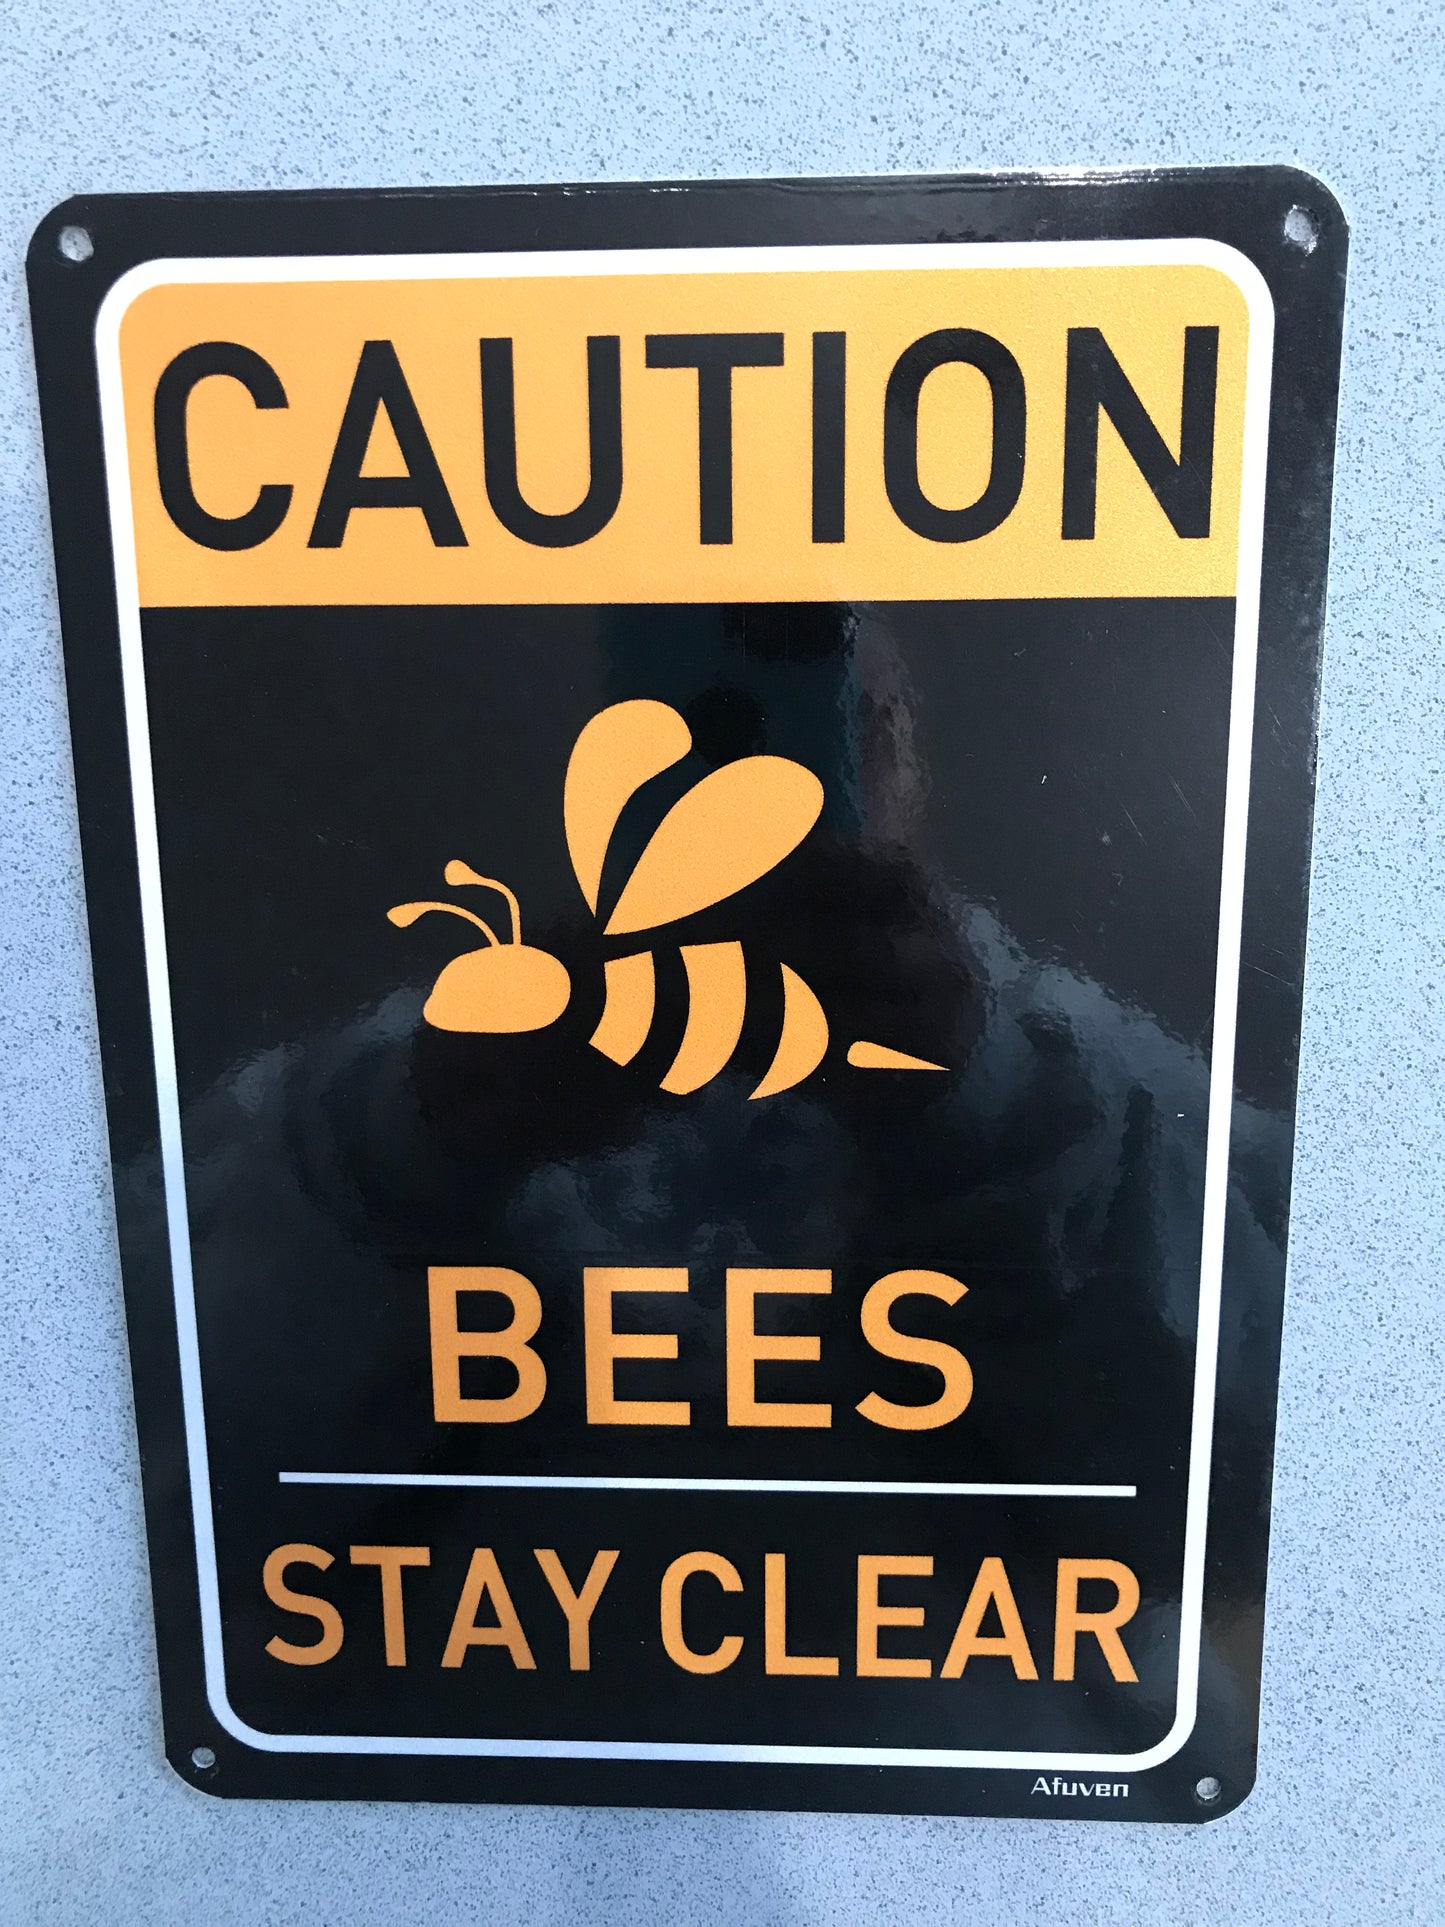 Caution Bees Stay Clear